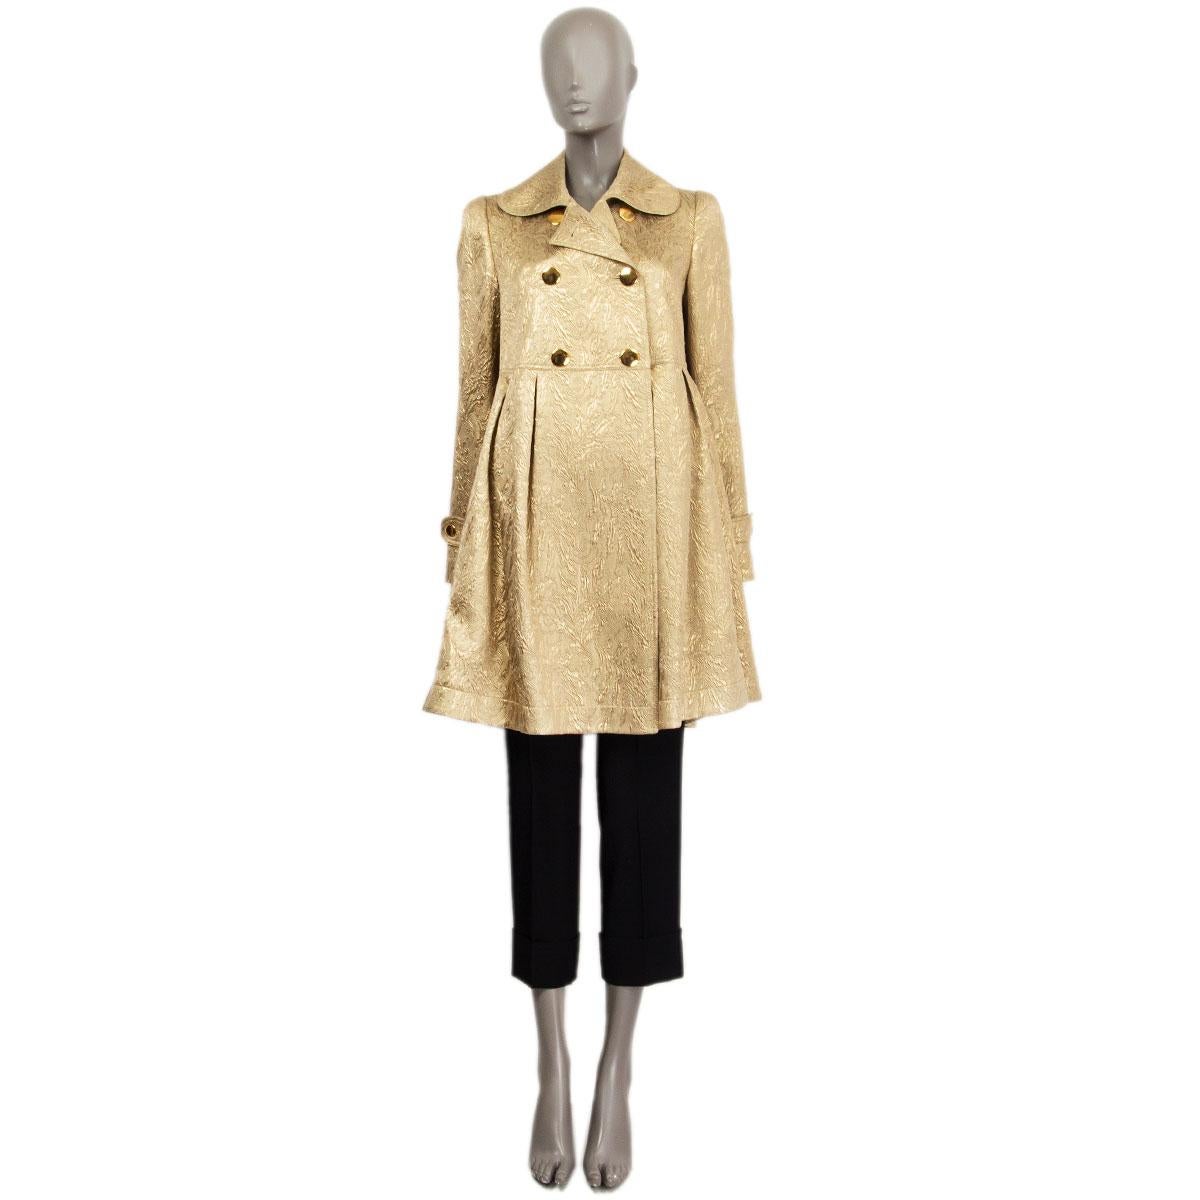 100% authentic Burberry double breasted flared brocade coat in gold wool (39%), silk (39%) and polyester (22%) with epaulettes at sleeve-cuffs. Closes with three gold-tone buttons at the front, has pleats under the waist-line and slit pockets. Lined